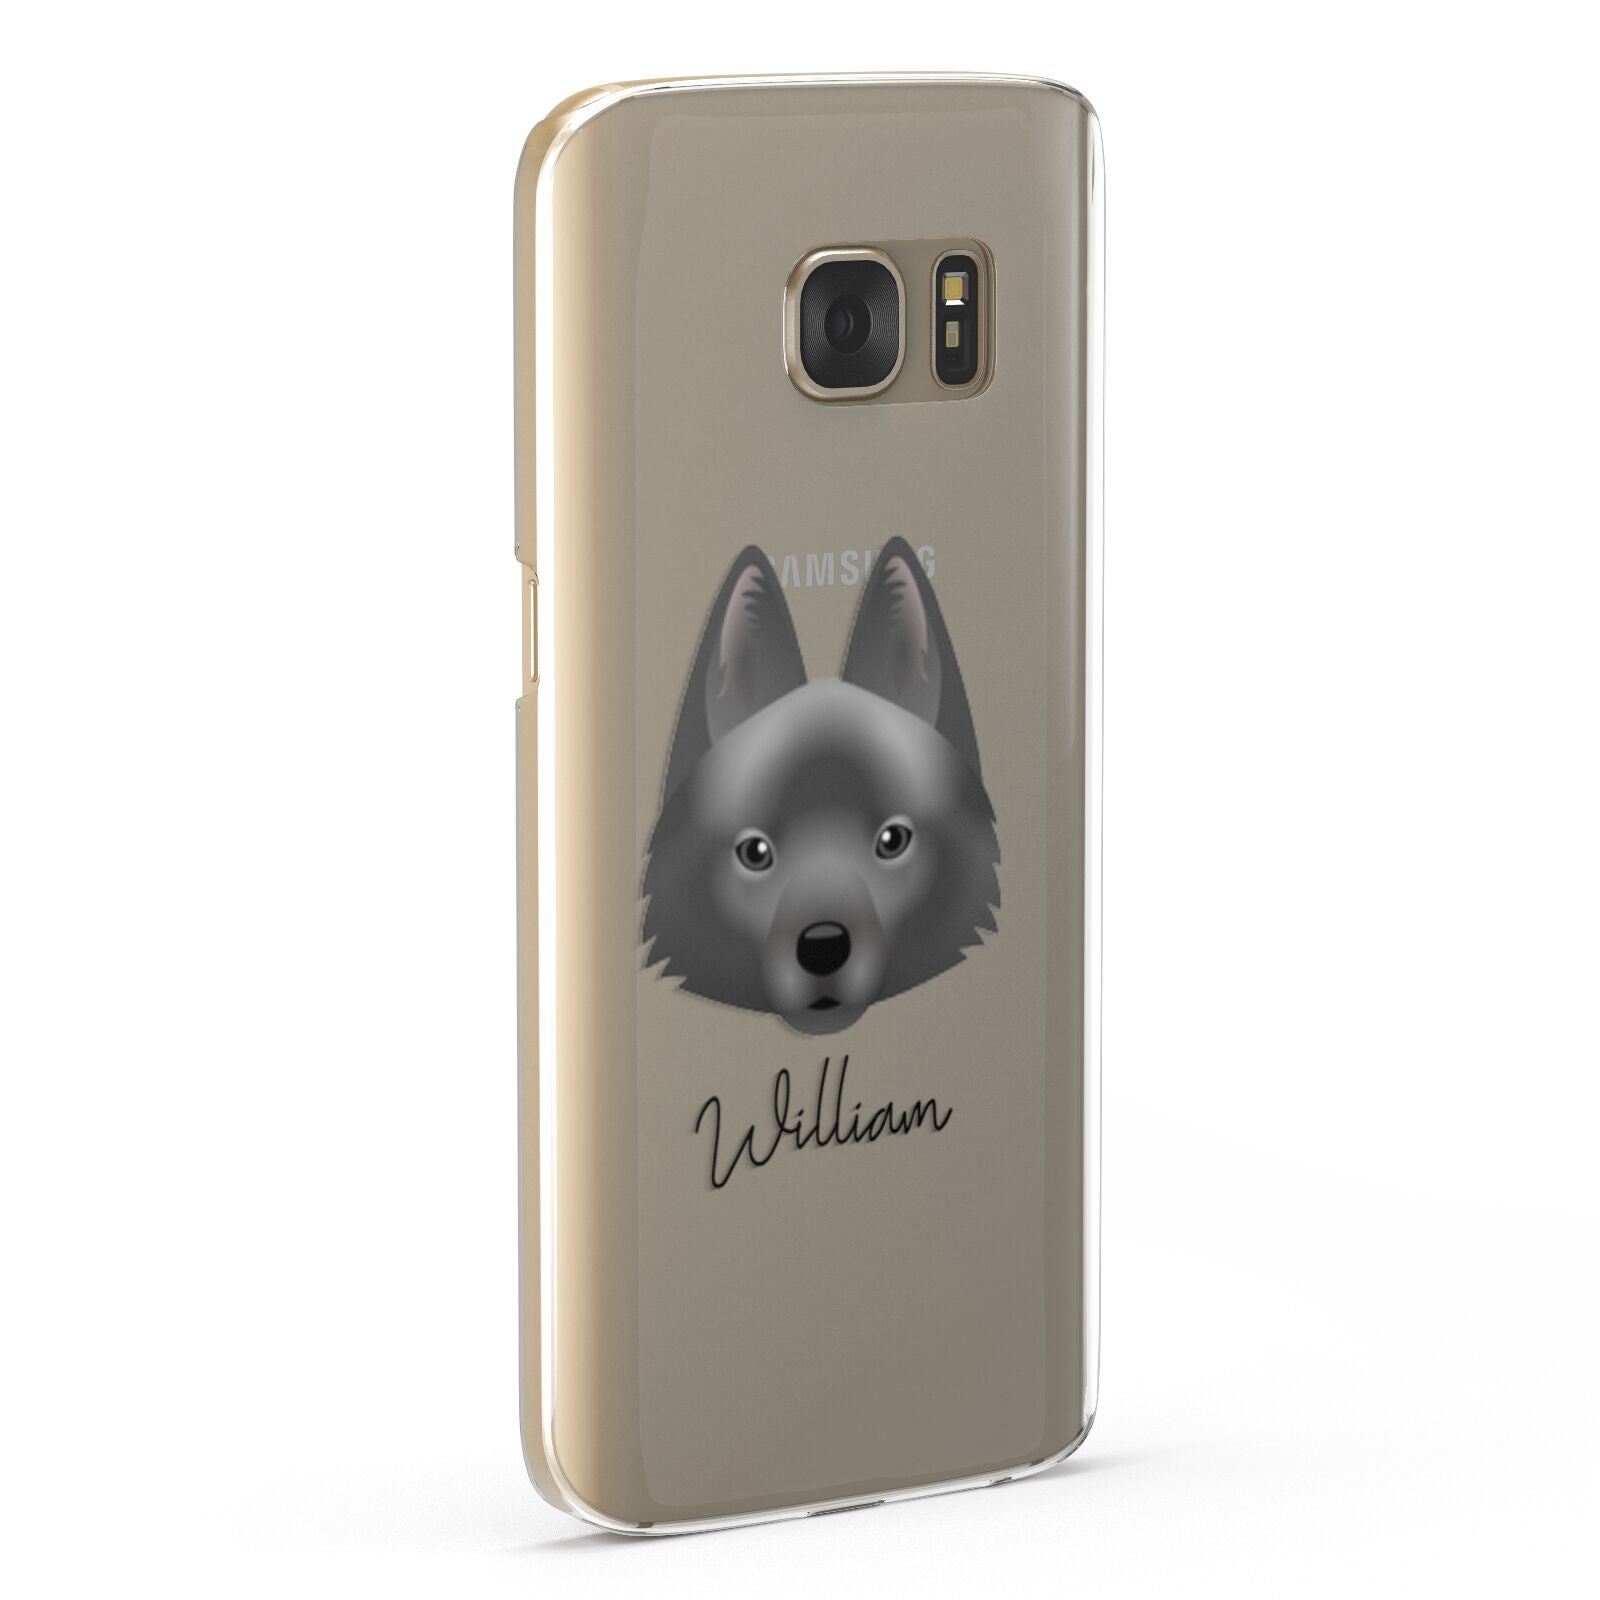 Schipperke Personalised Samsung Galaxy Case Fourty Five Degrees